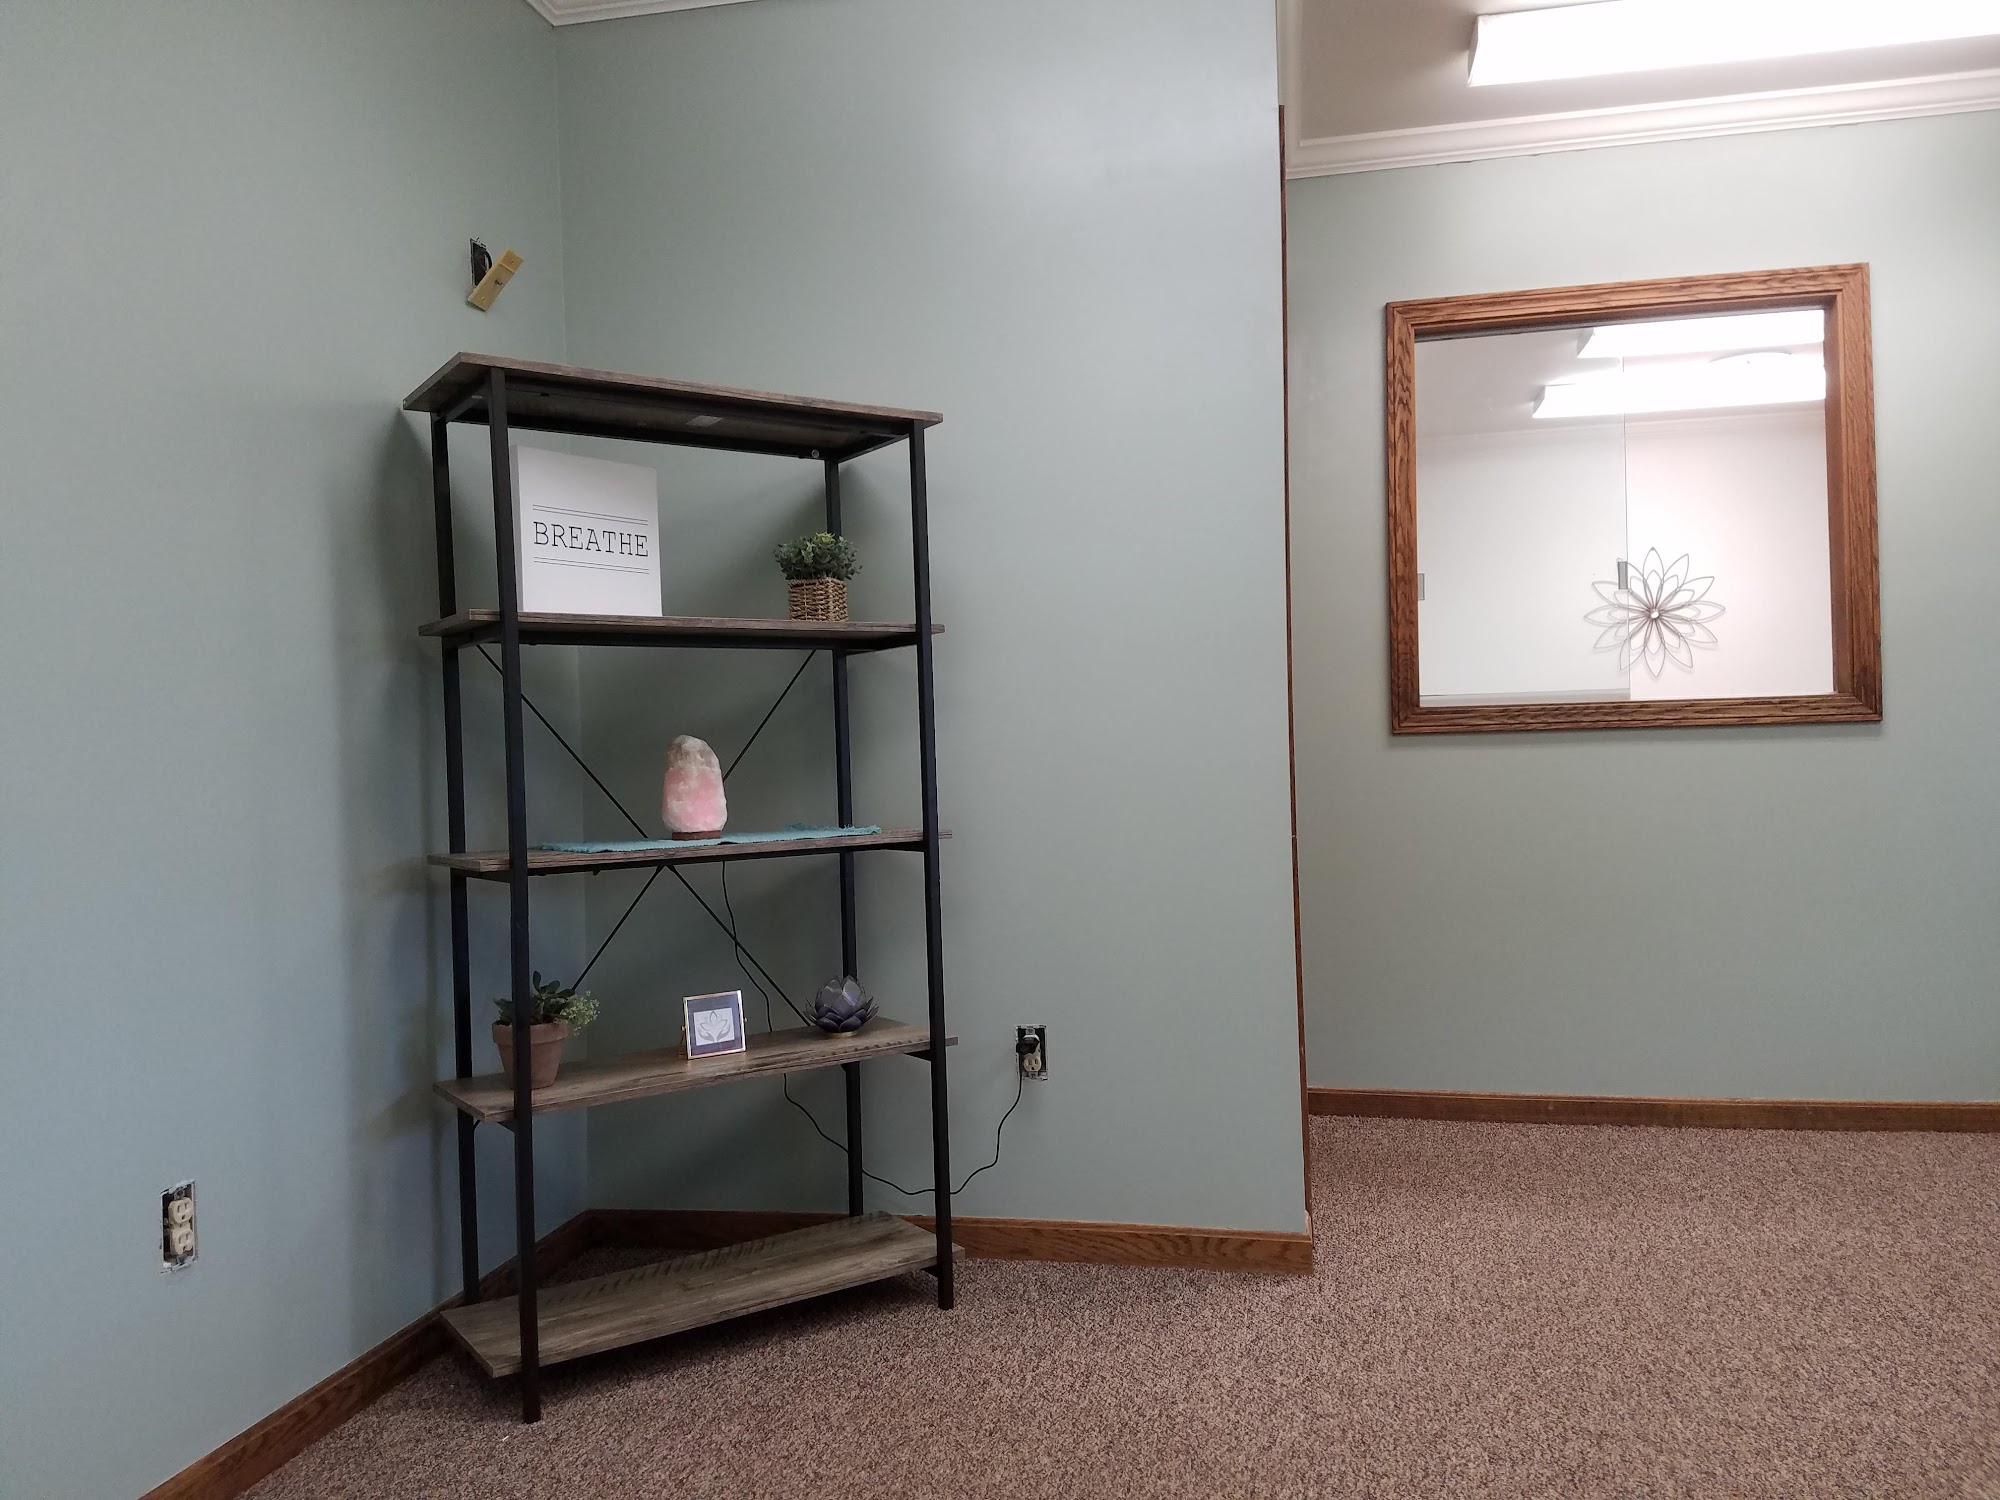 Tailored Massage Therapy and Wellness 6174 Commerce Dr Suite E, Mt Gilead Ohio 43338